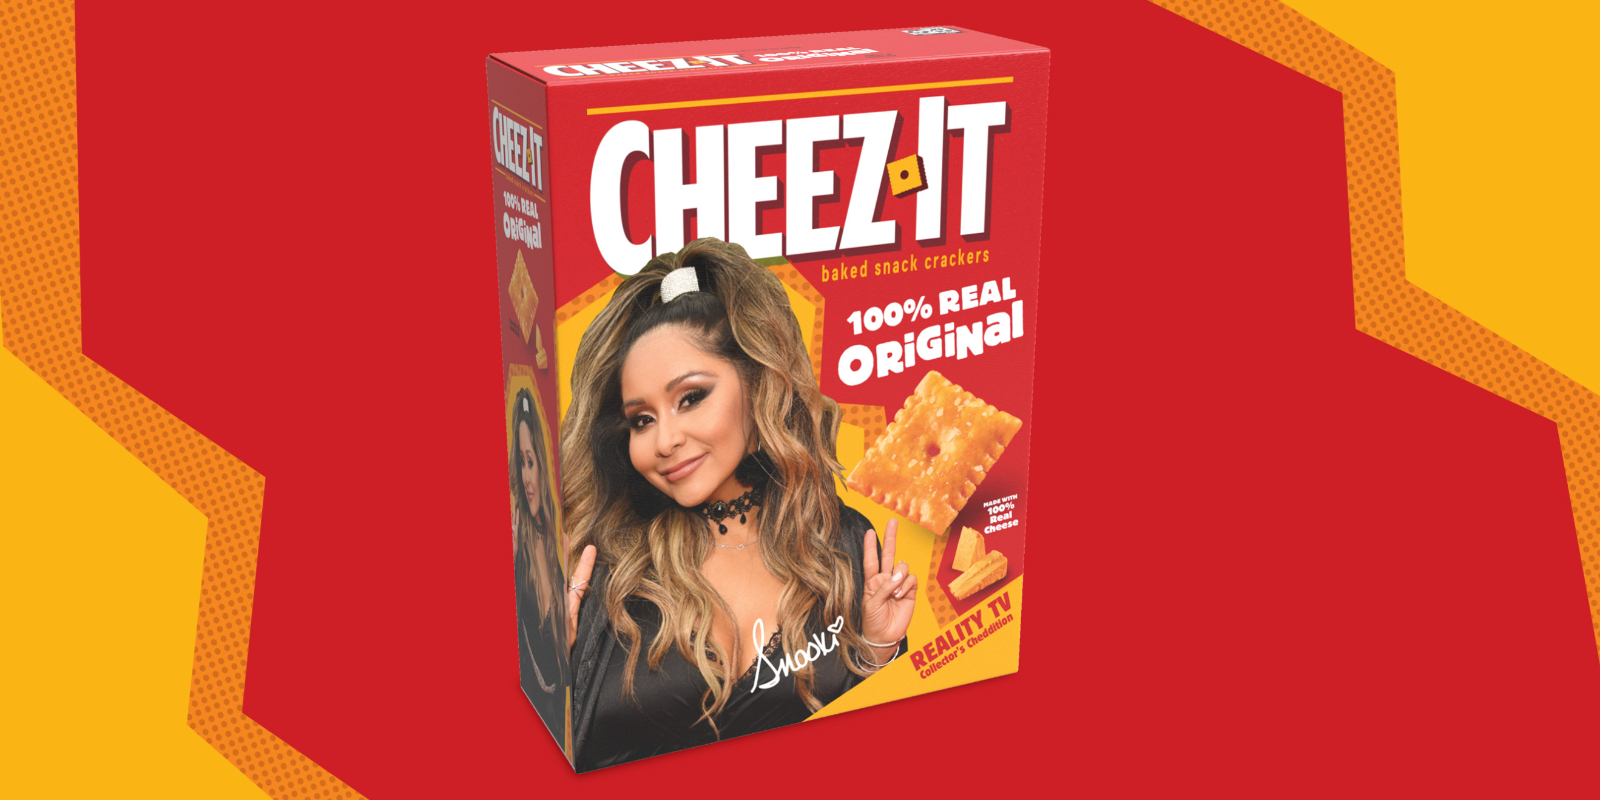 Nicole Polizzi poses on a box of cheez-it as one of its first reality stars featured on the snack product.